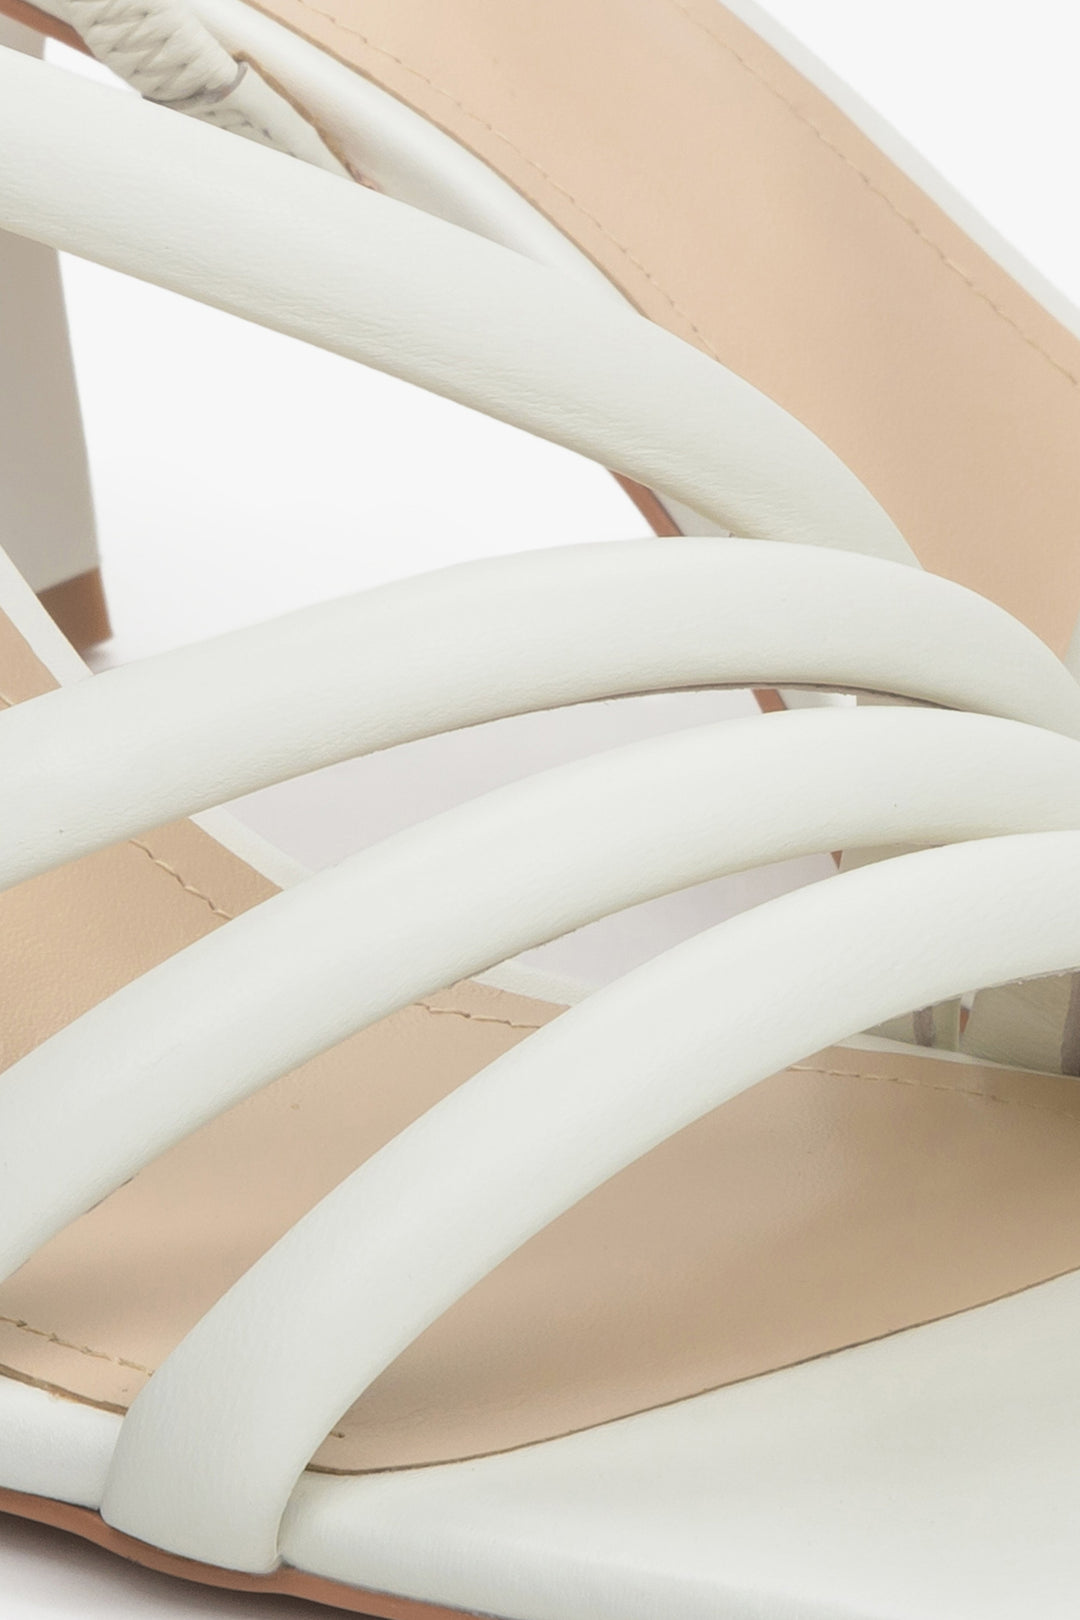 Women's strappy sandals in light beige made of natural leather by Estro - a close up on details.